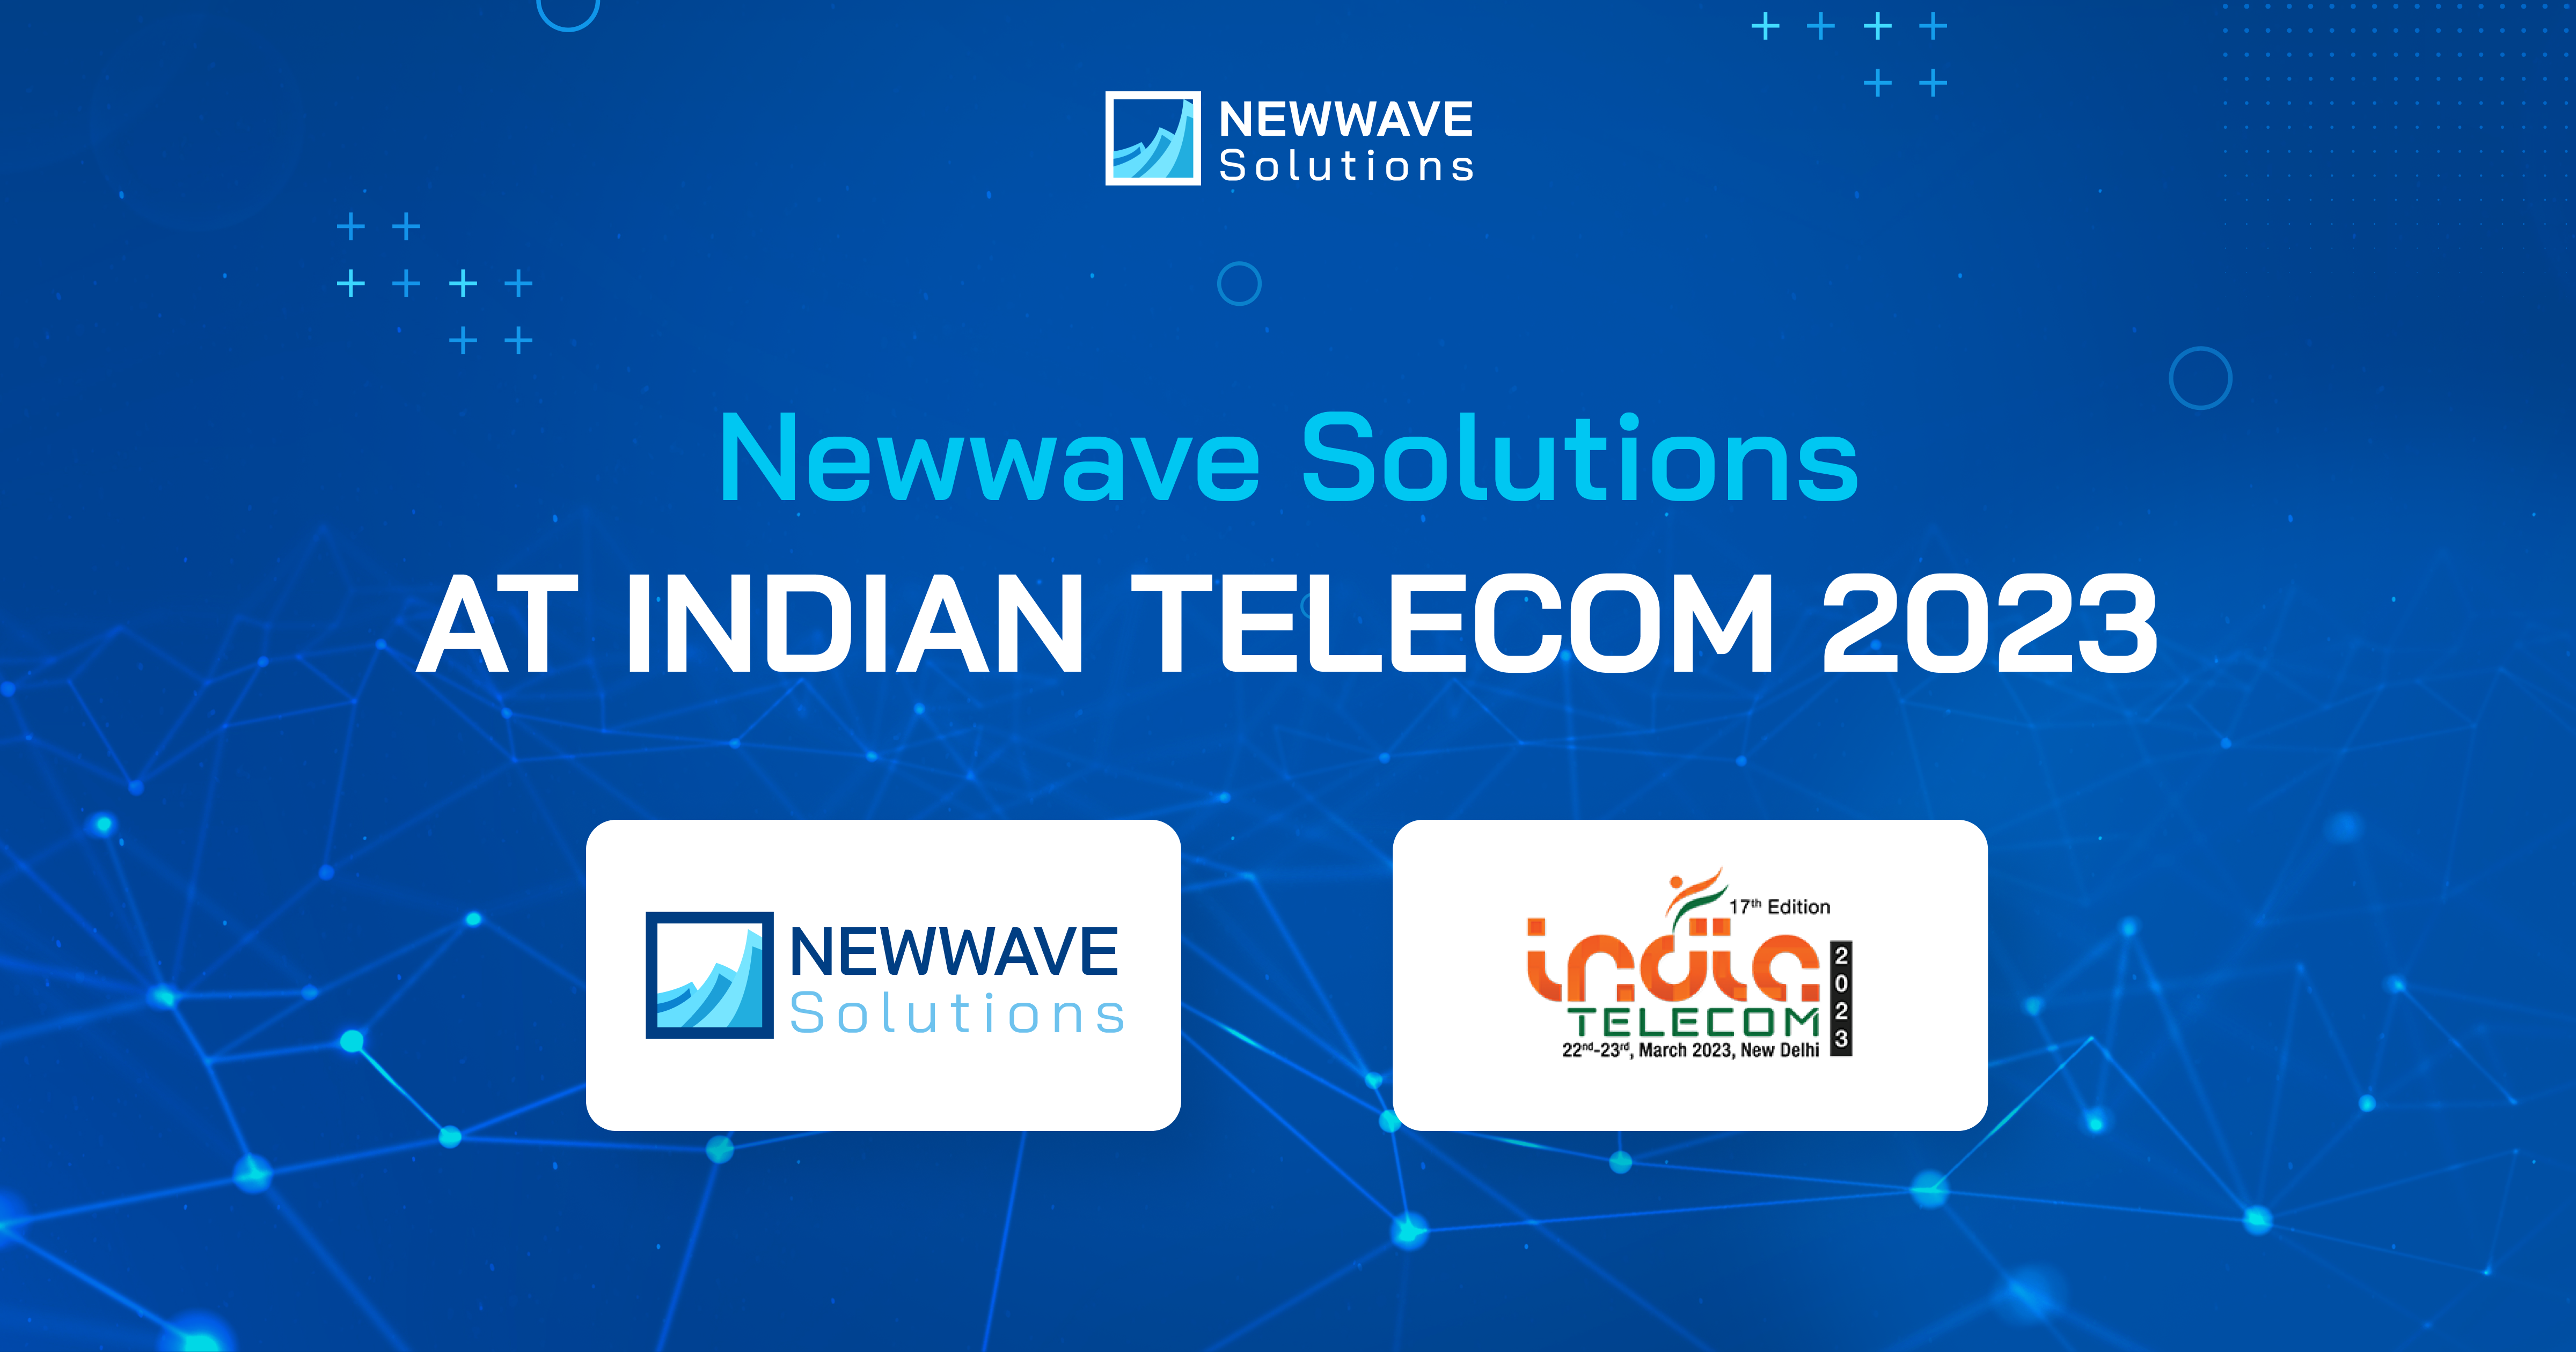 Newwave Solutions at Indian Telecom 2023